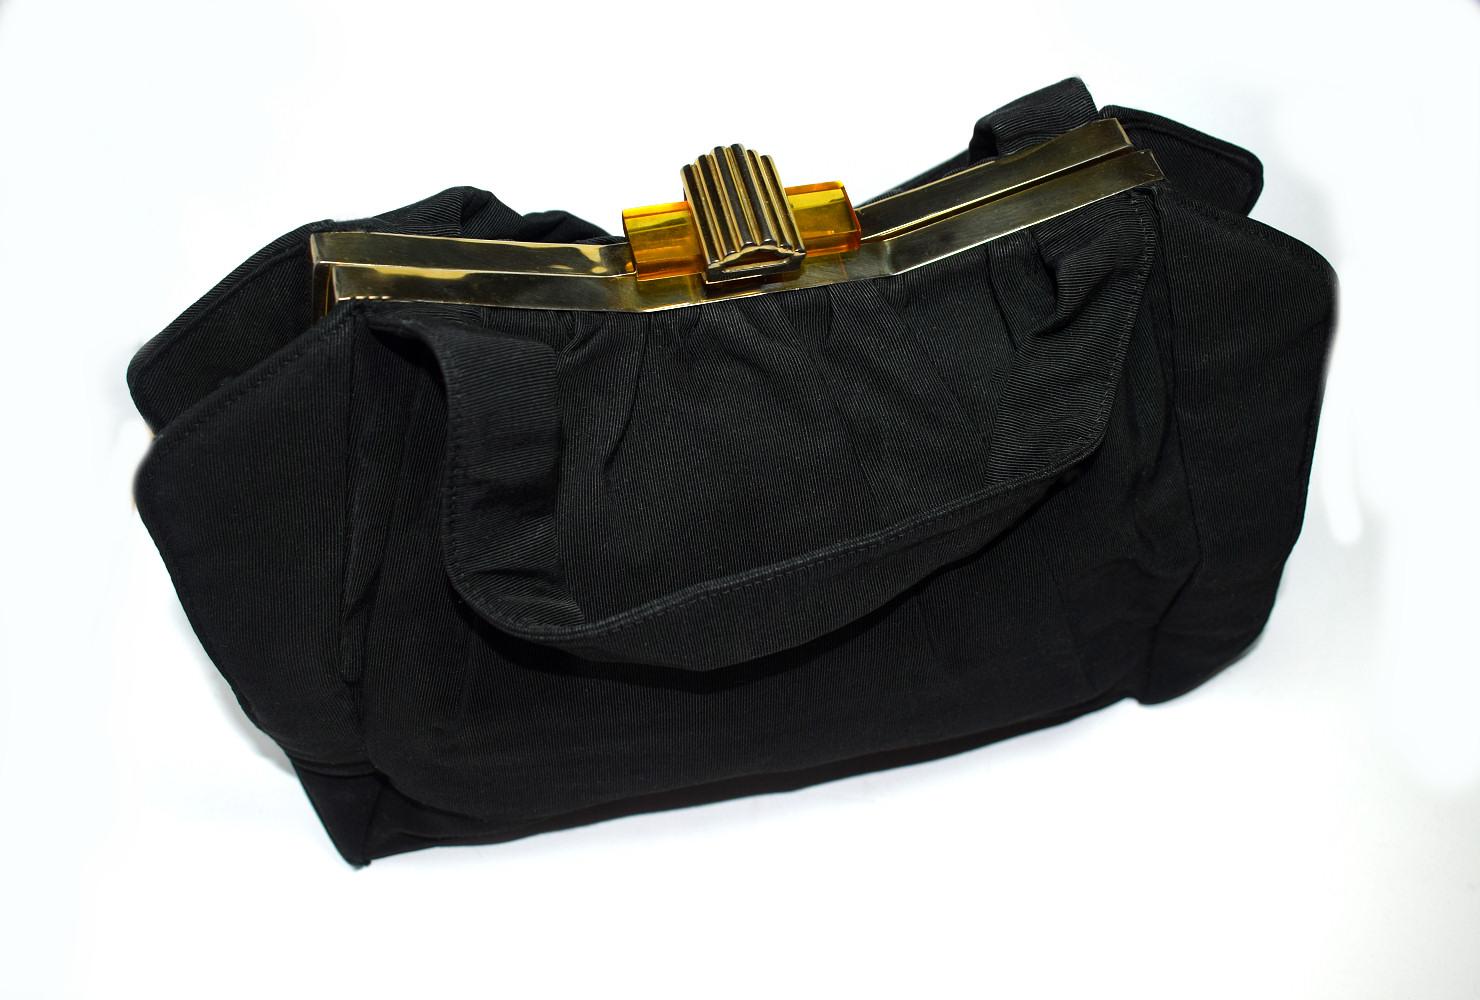 Wonderful Art Deco black grosgrain handbag with a real geometric feel. Dating to the 1930s and in great condition especially considering its age. This bag has an unusual shape being rectangle with angles and 